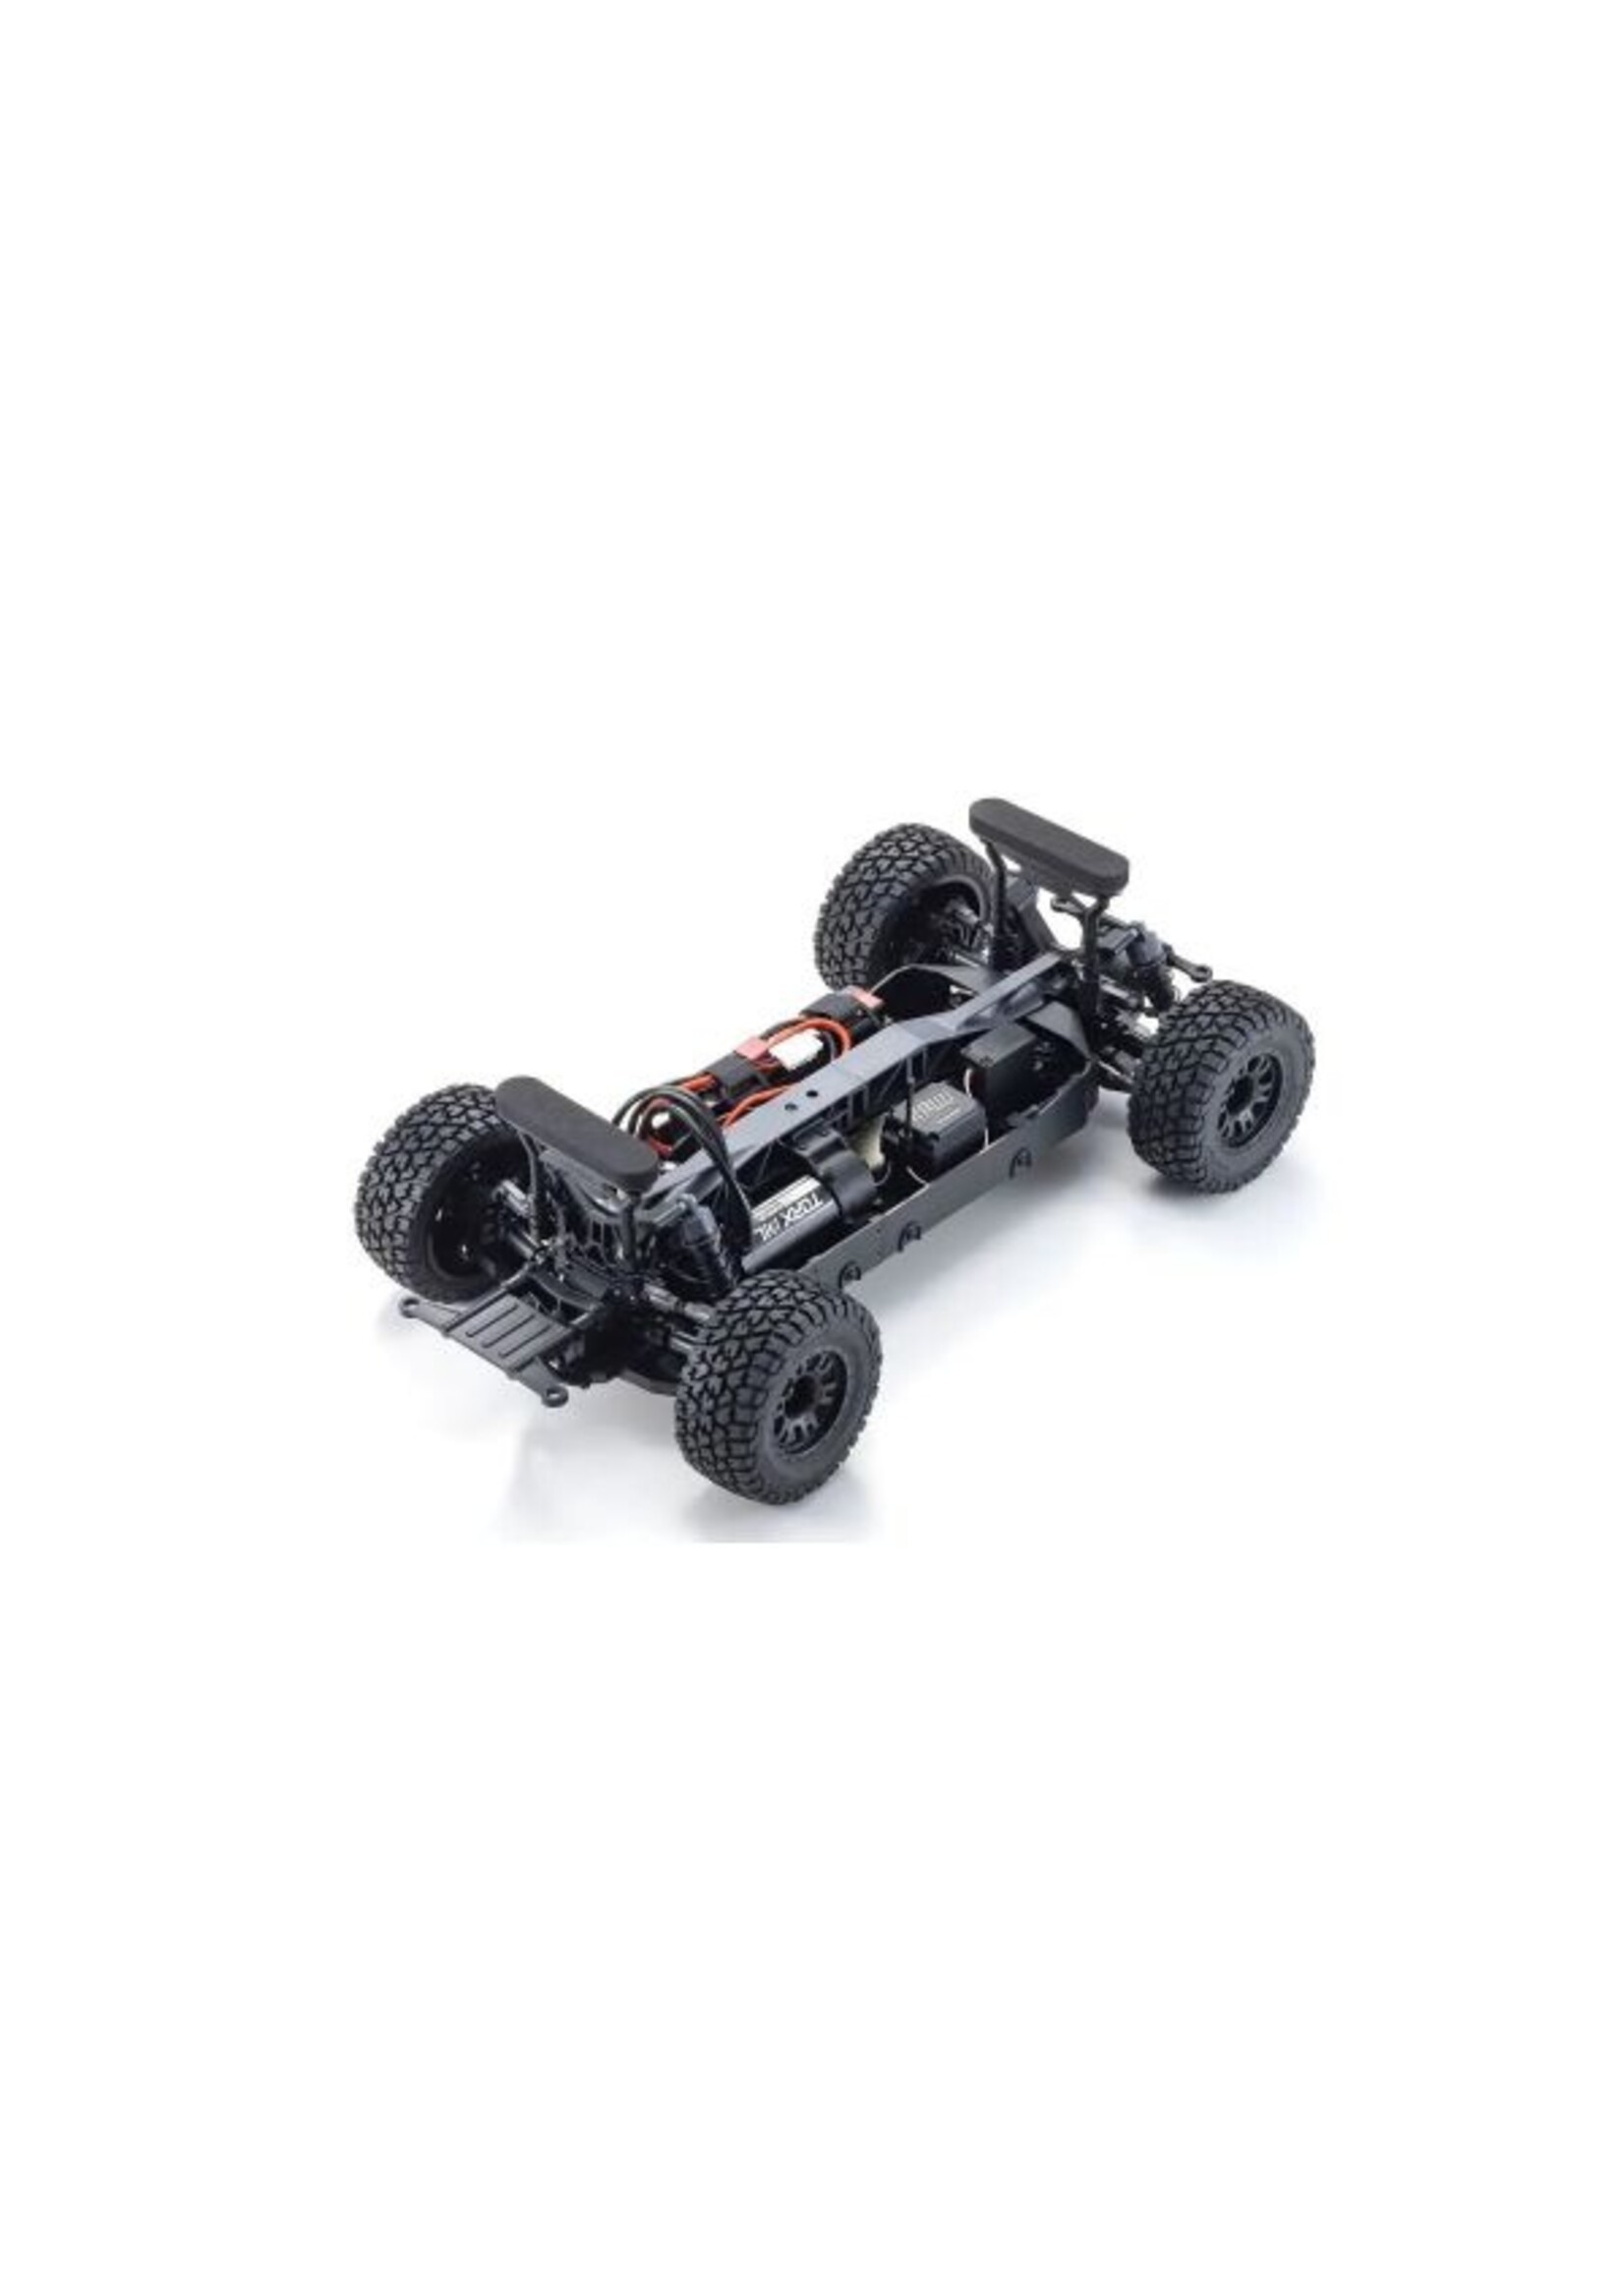 Kyosho KYO34703 Kyosho 1:10 Scale Radio Controlled Electric Powered 4WD KB10L Series readyset 2021 Toyota Tacoma TRD Pro